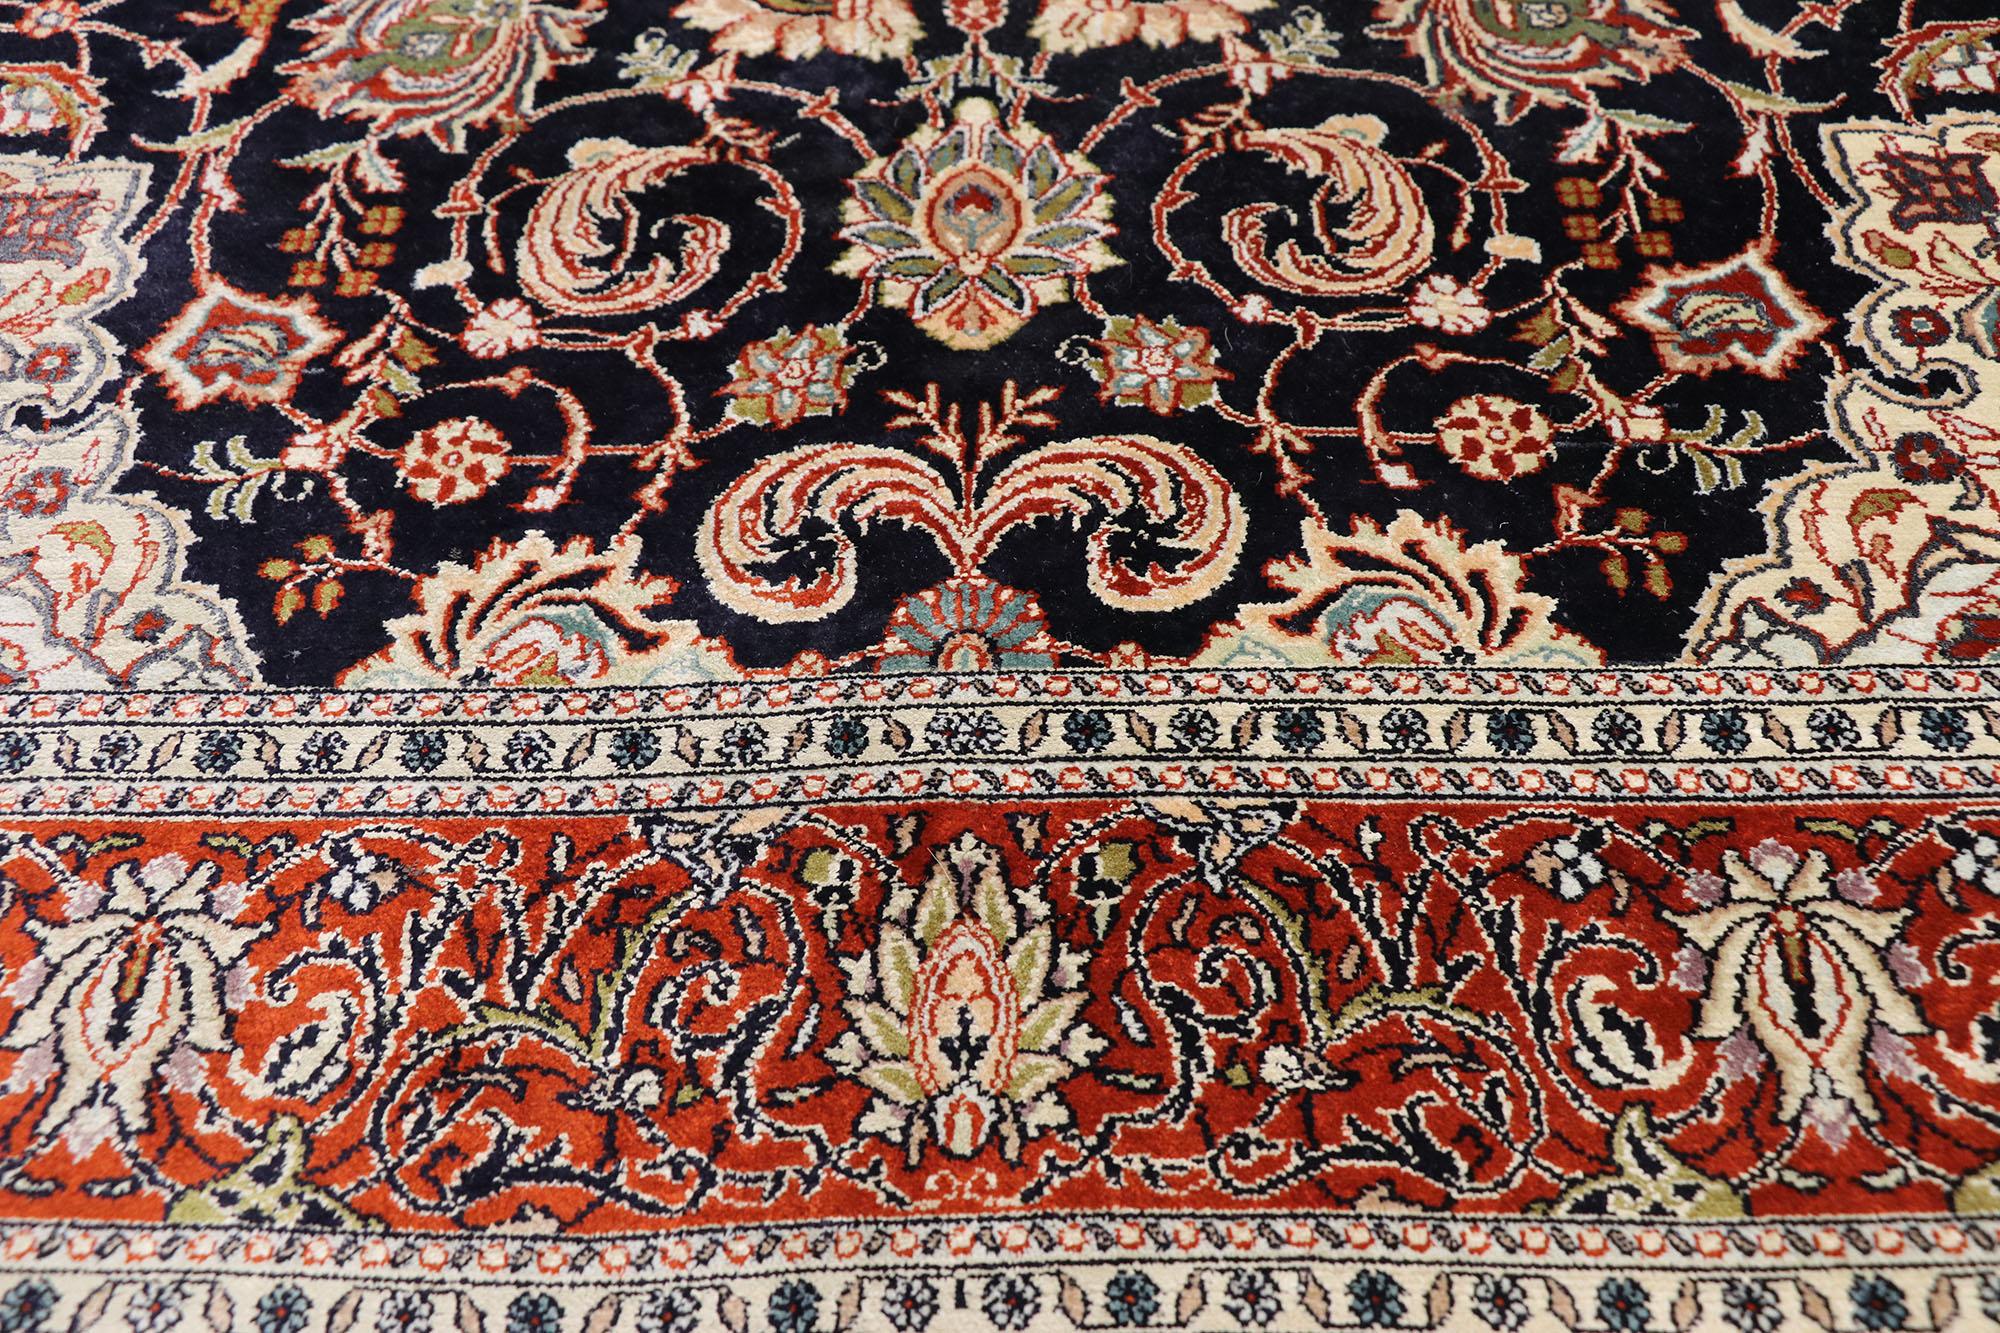 Vintage Persian Kashan Silk Rug with Old World Dutch Renaissance Style In Good Condition For Sale In Dallas, TX